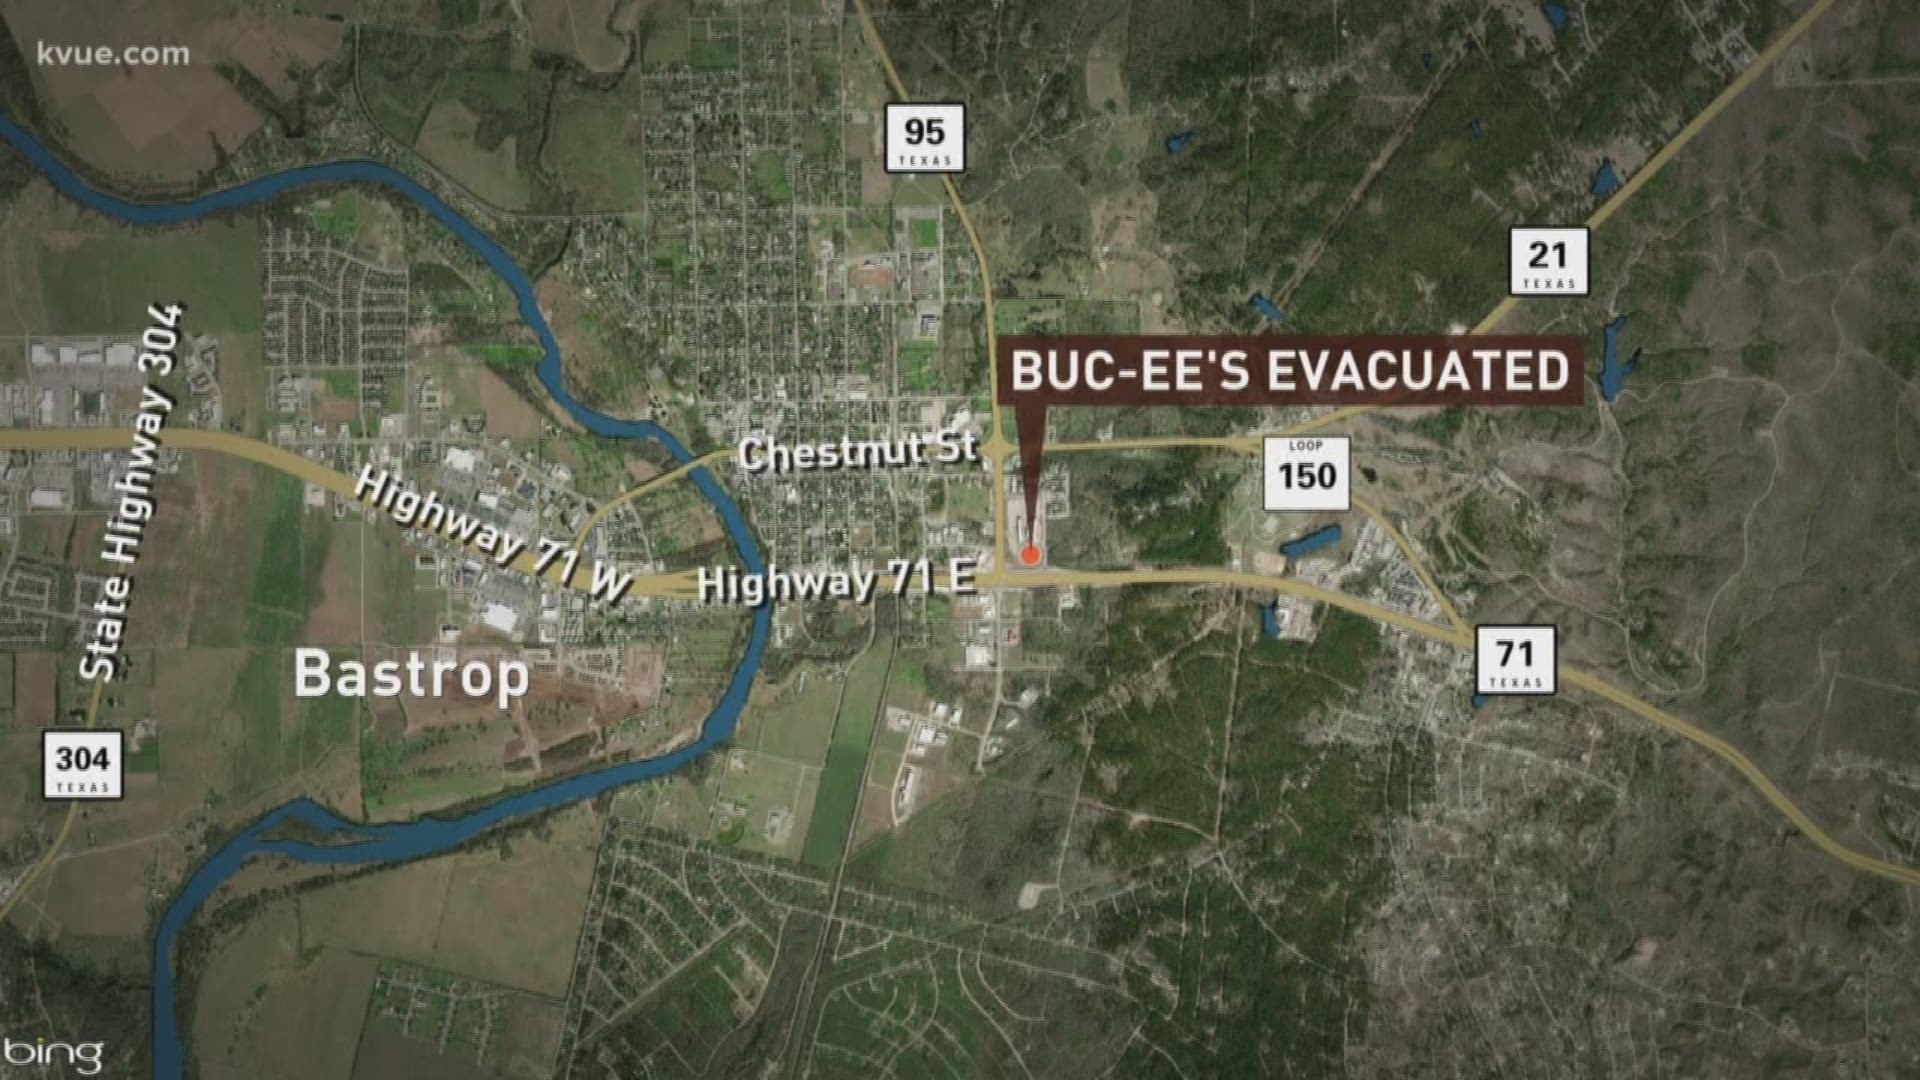 Officials say the Buc-ee's gas station and convenience store in Bastrop has been evacuated due to a bomb threat.